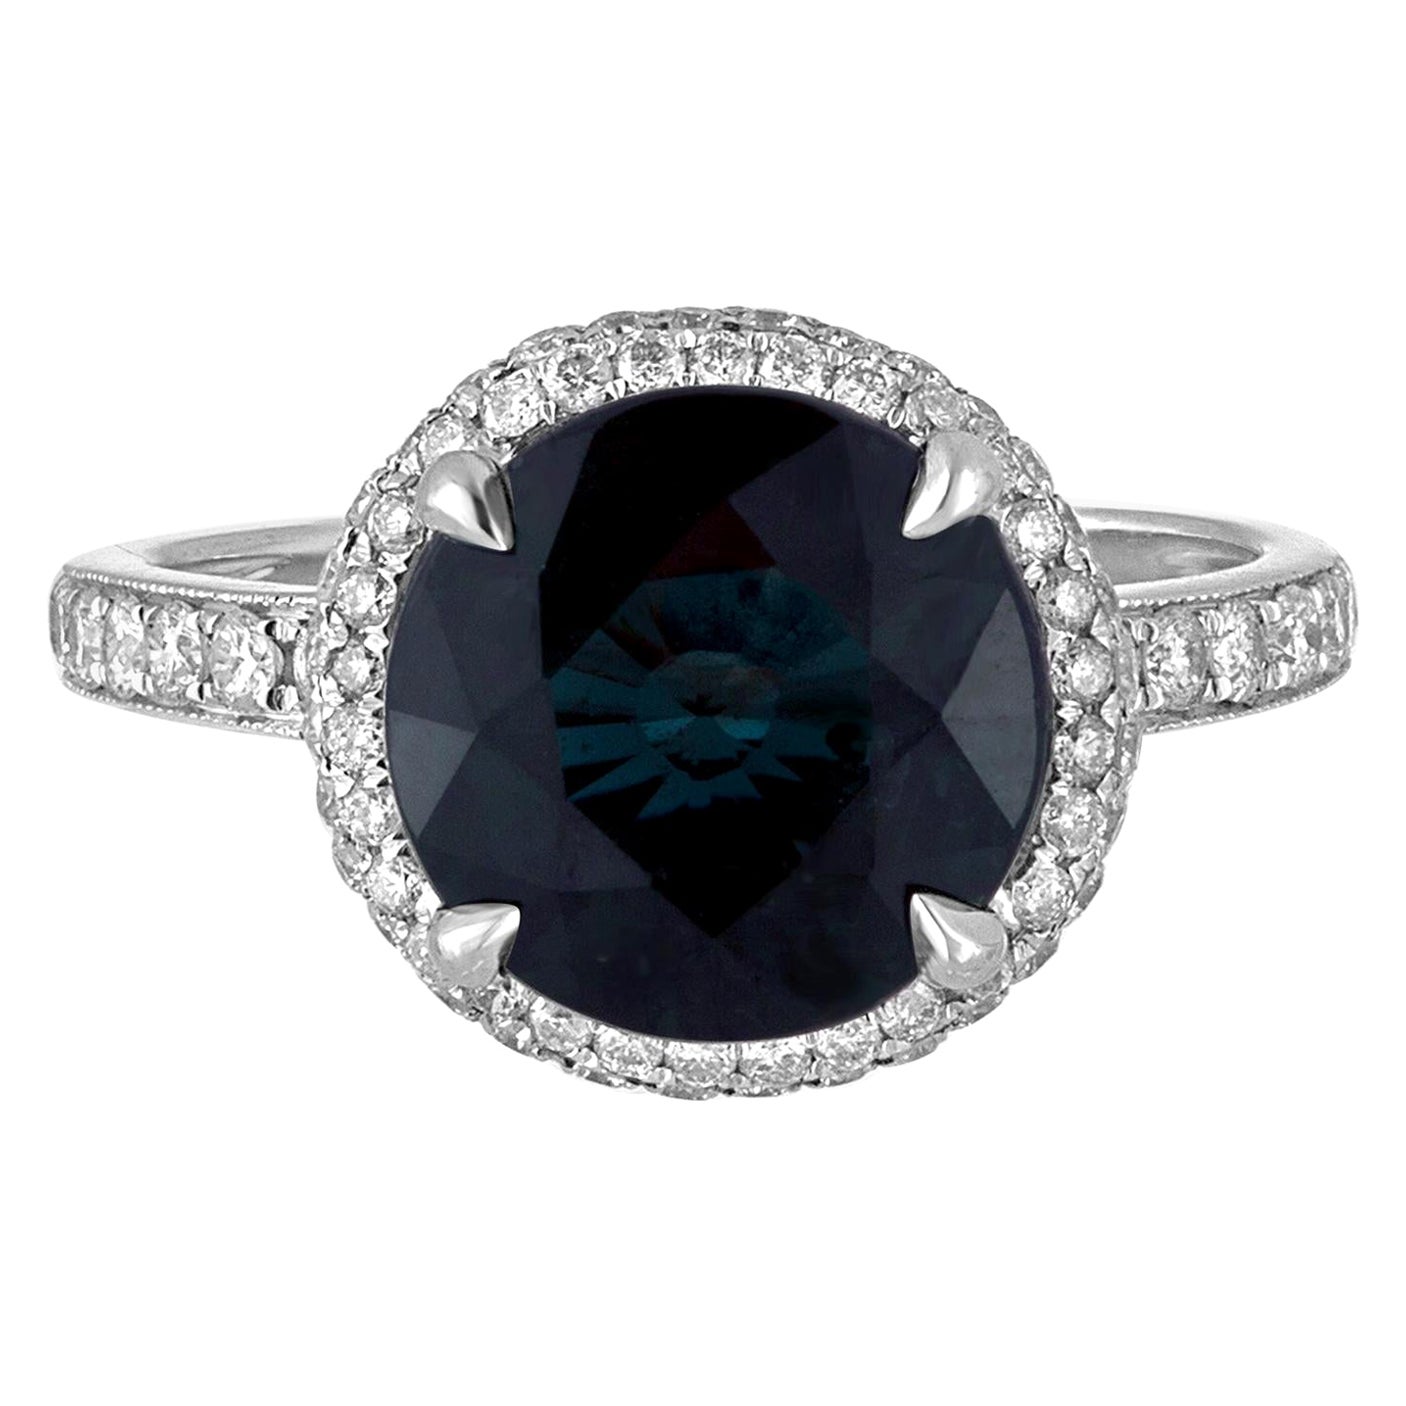 Certified No Heat 4.98 Carat Round Greenish Blue Teal Sapphire Diamond Gold Ring For Sale